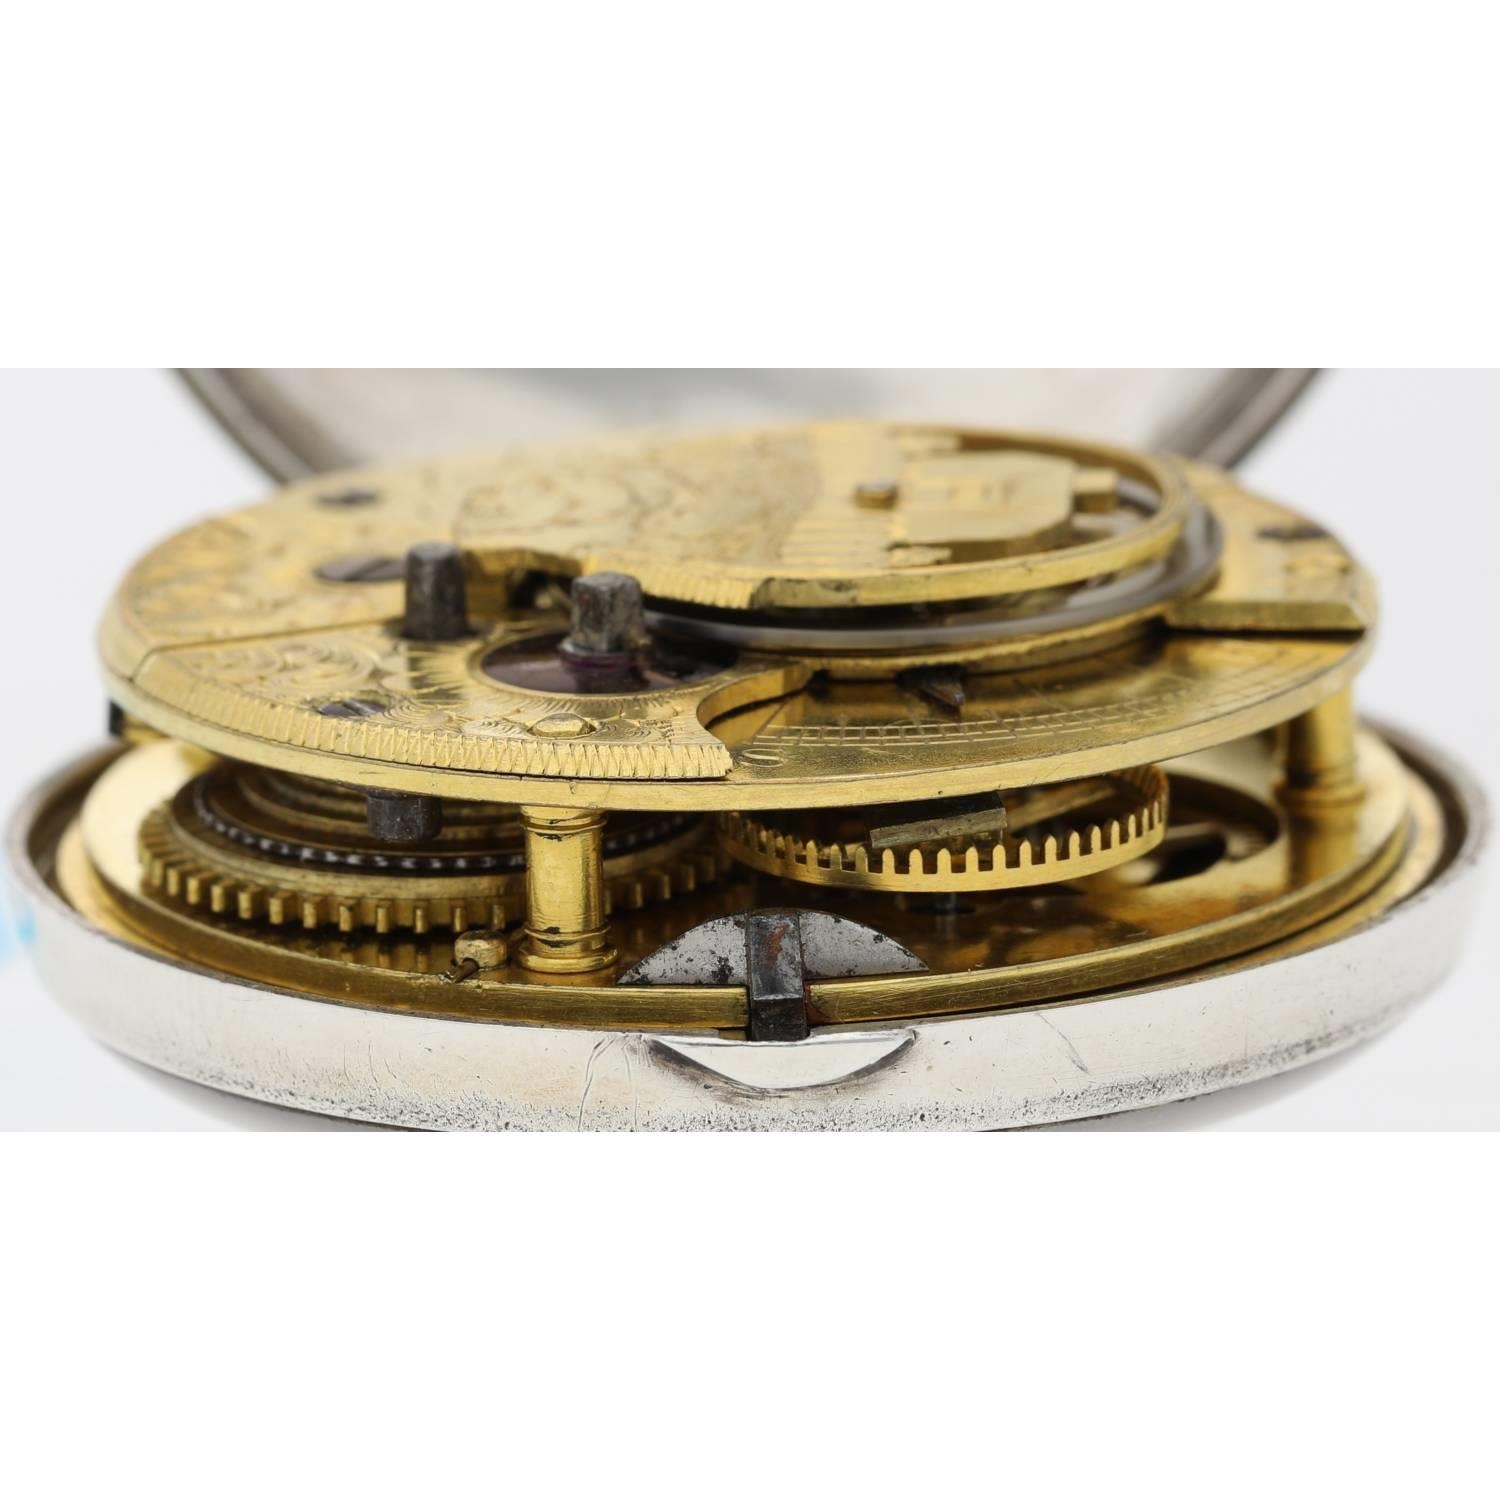 John Callcott, Cotton - rare 19th century English silver pair cased verge pocket watch, signed fusee - Image 6 of 10